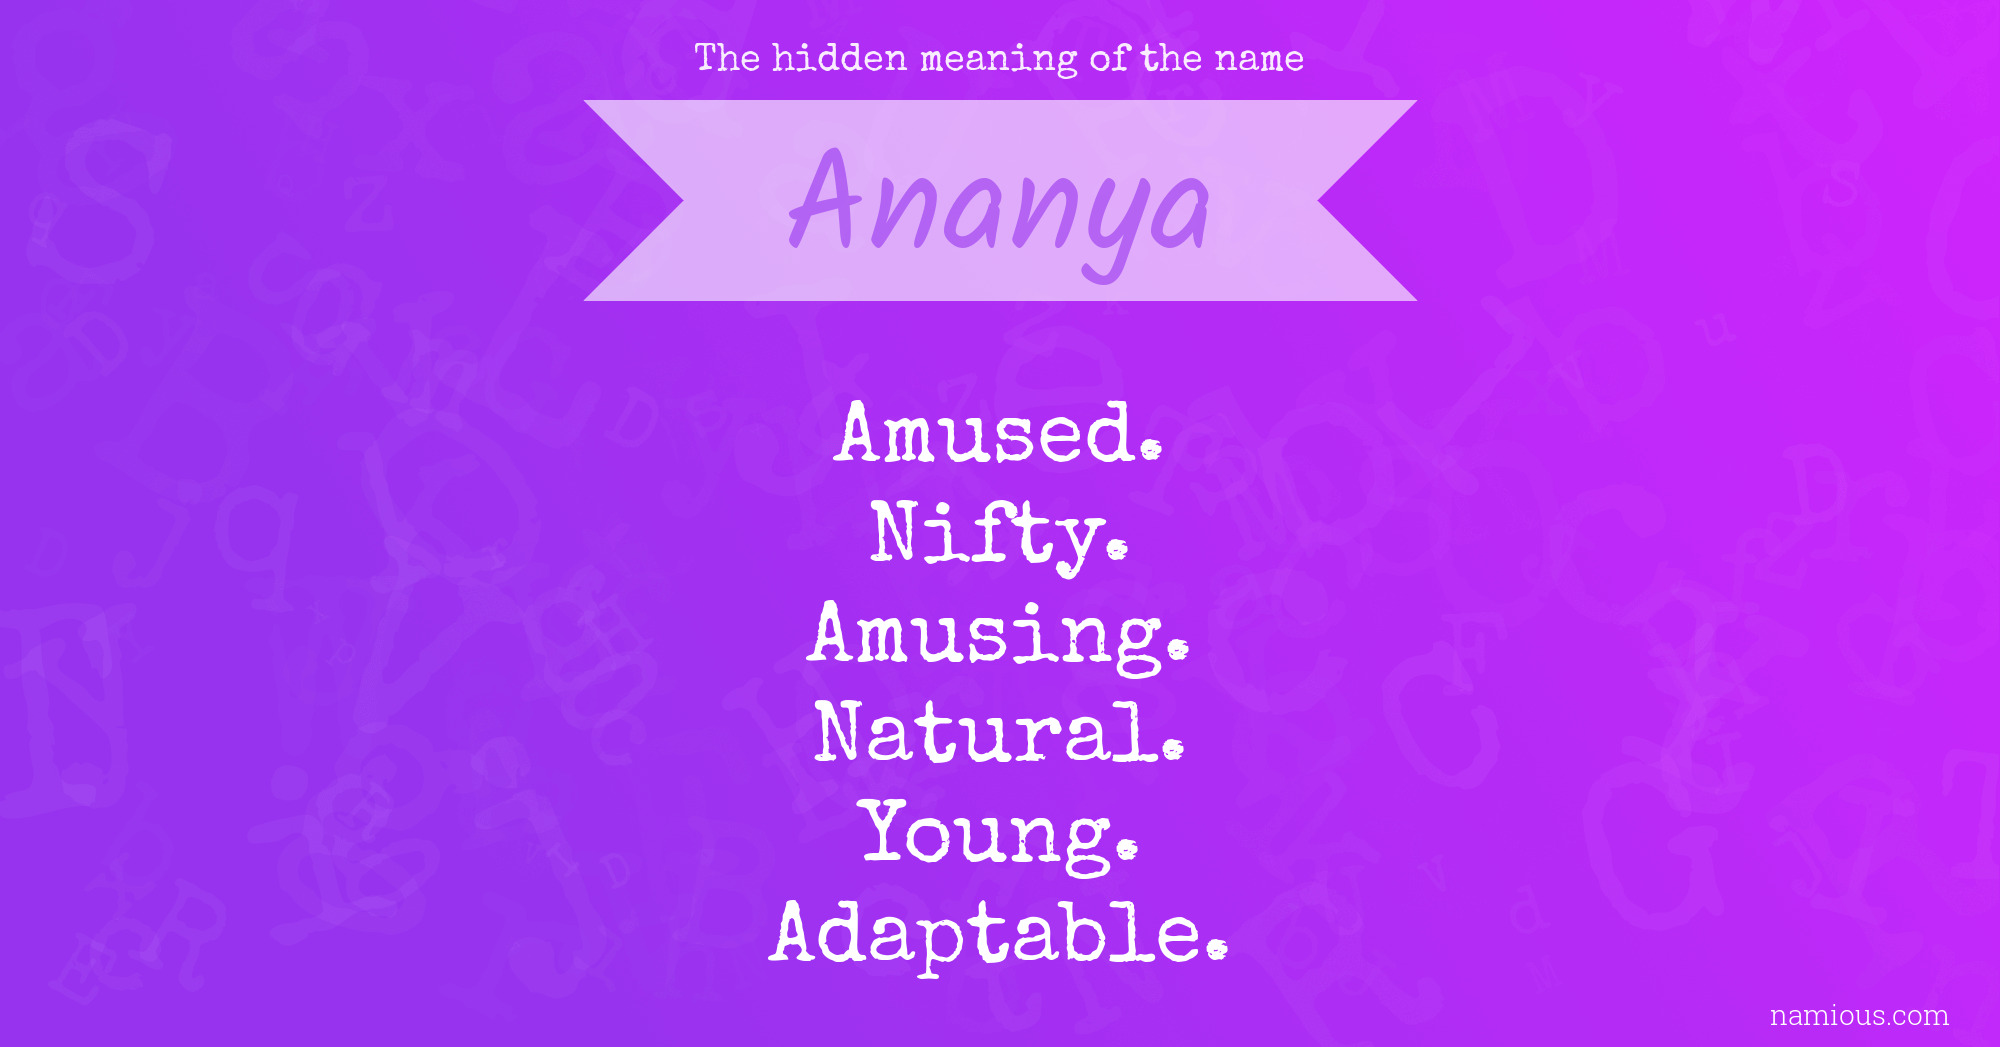 The hidden meaning of the name Ananya | Namious